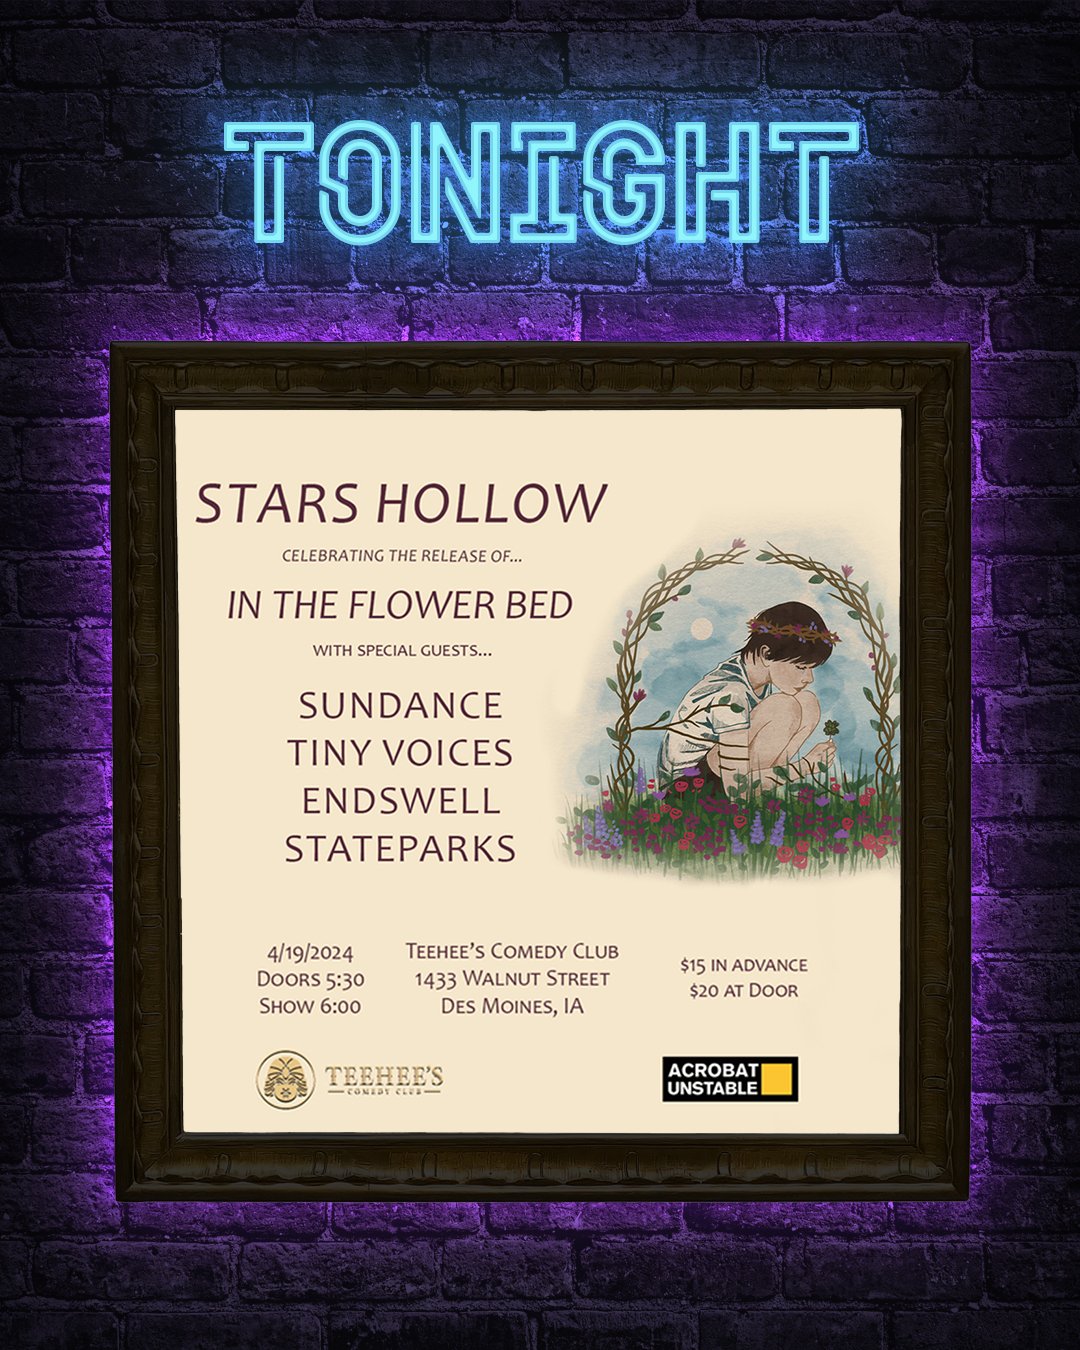 🎼🎤🥂 Join us in celebrating the release of In The Flower Bed with Stars Hollow and special guests!
Get 🎟🎟🎟 at teeheescomedy.com/shows